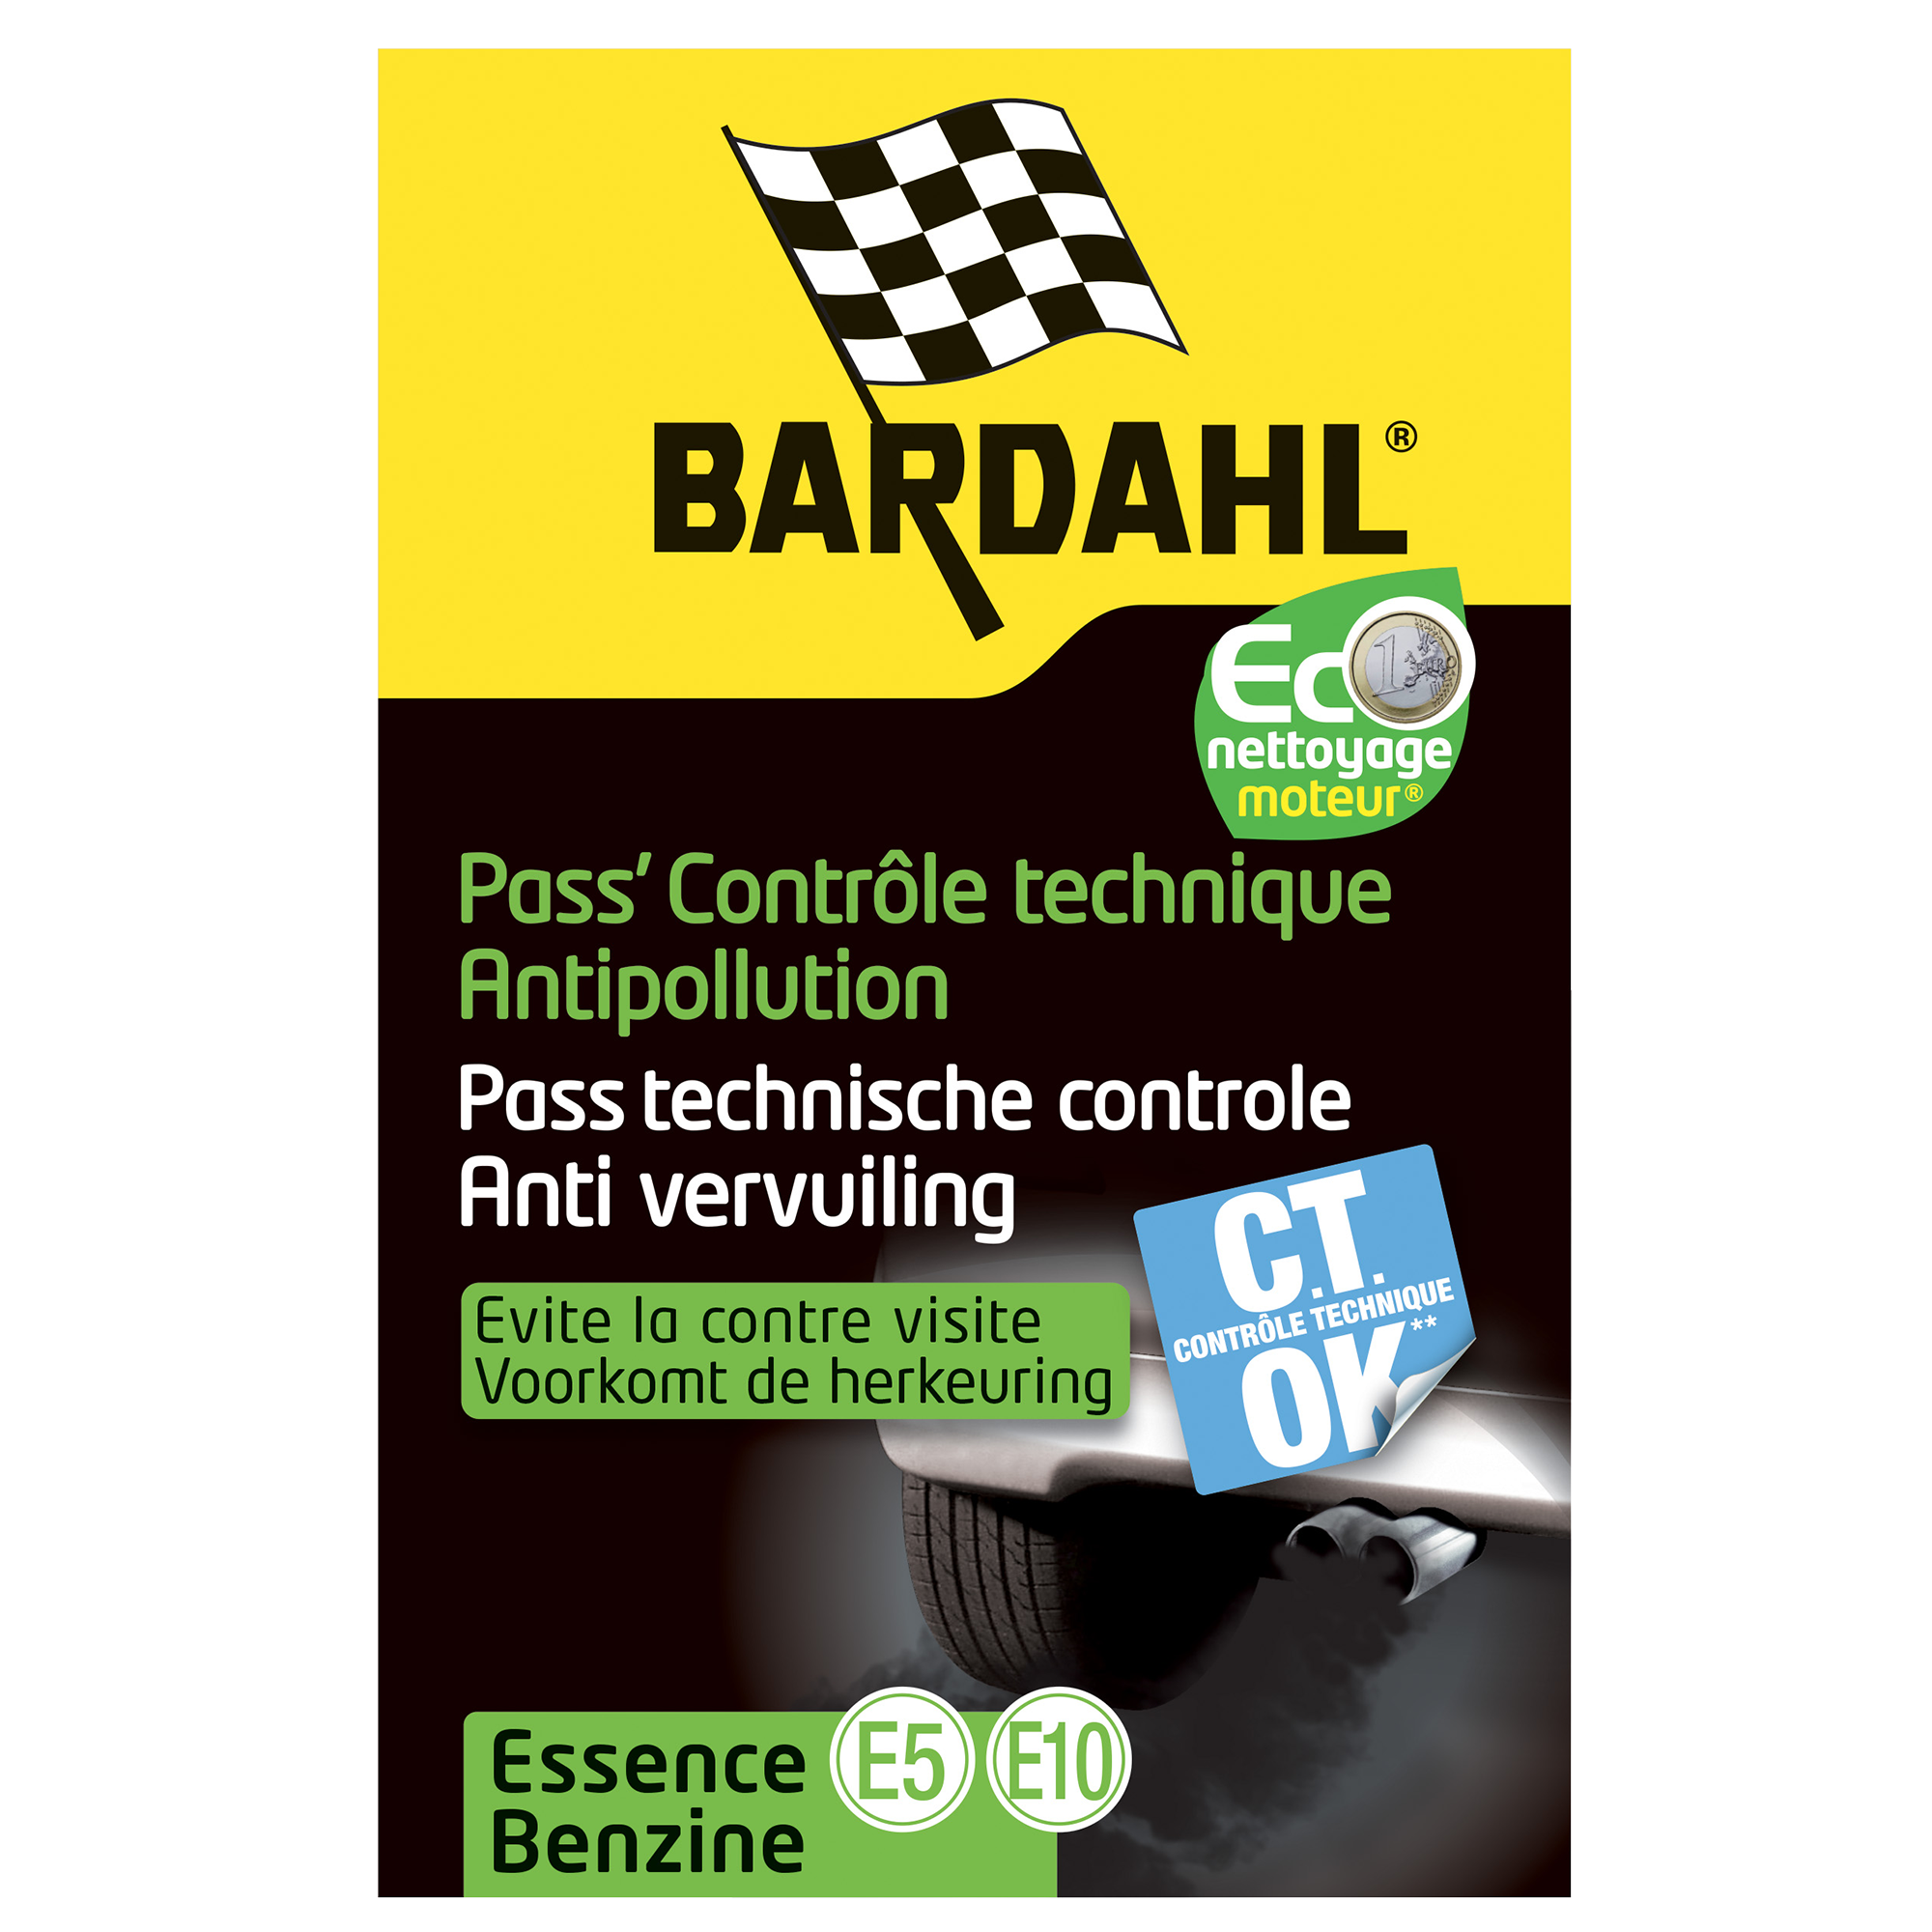 Additifs Carburant Bardahl Consommez Moins Essence